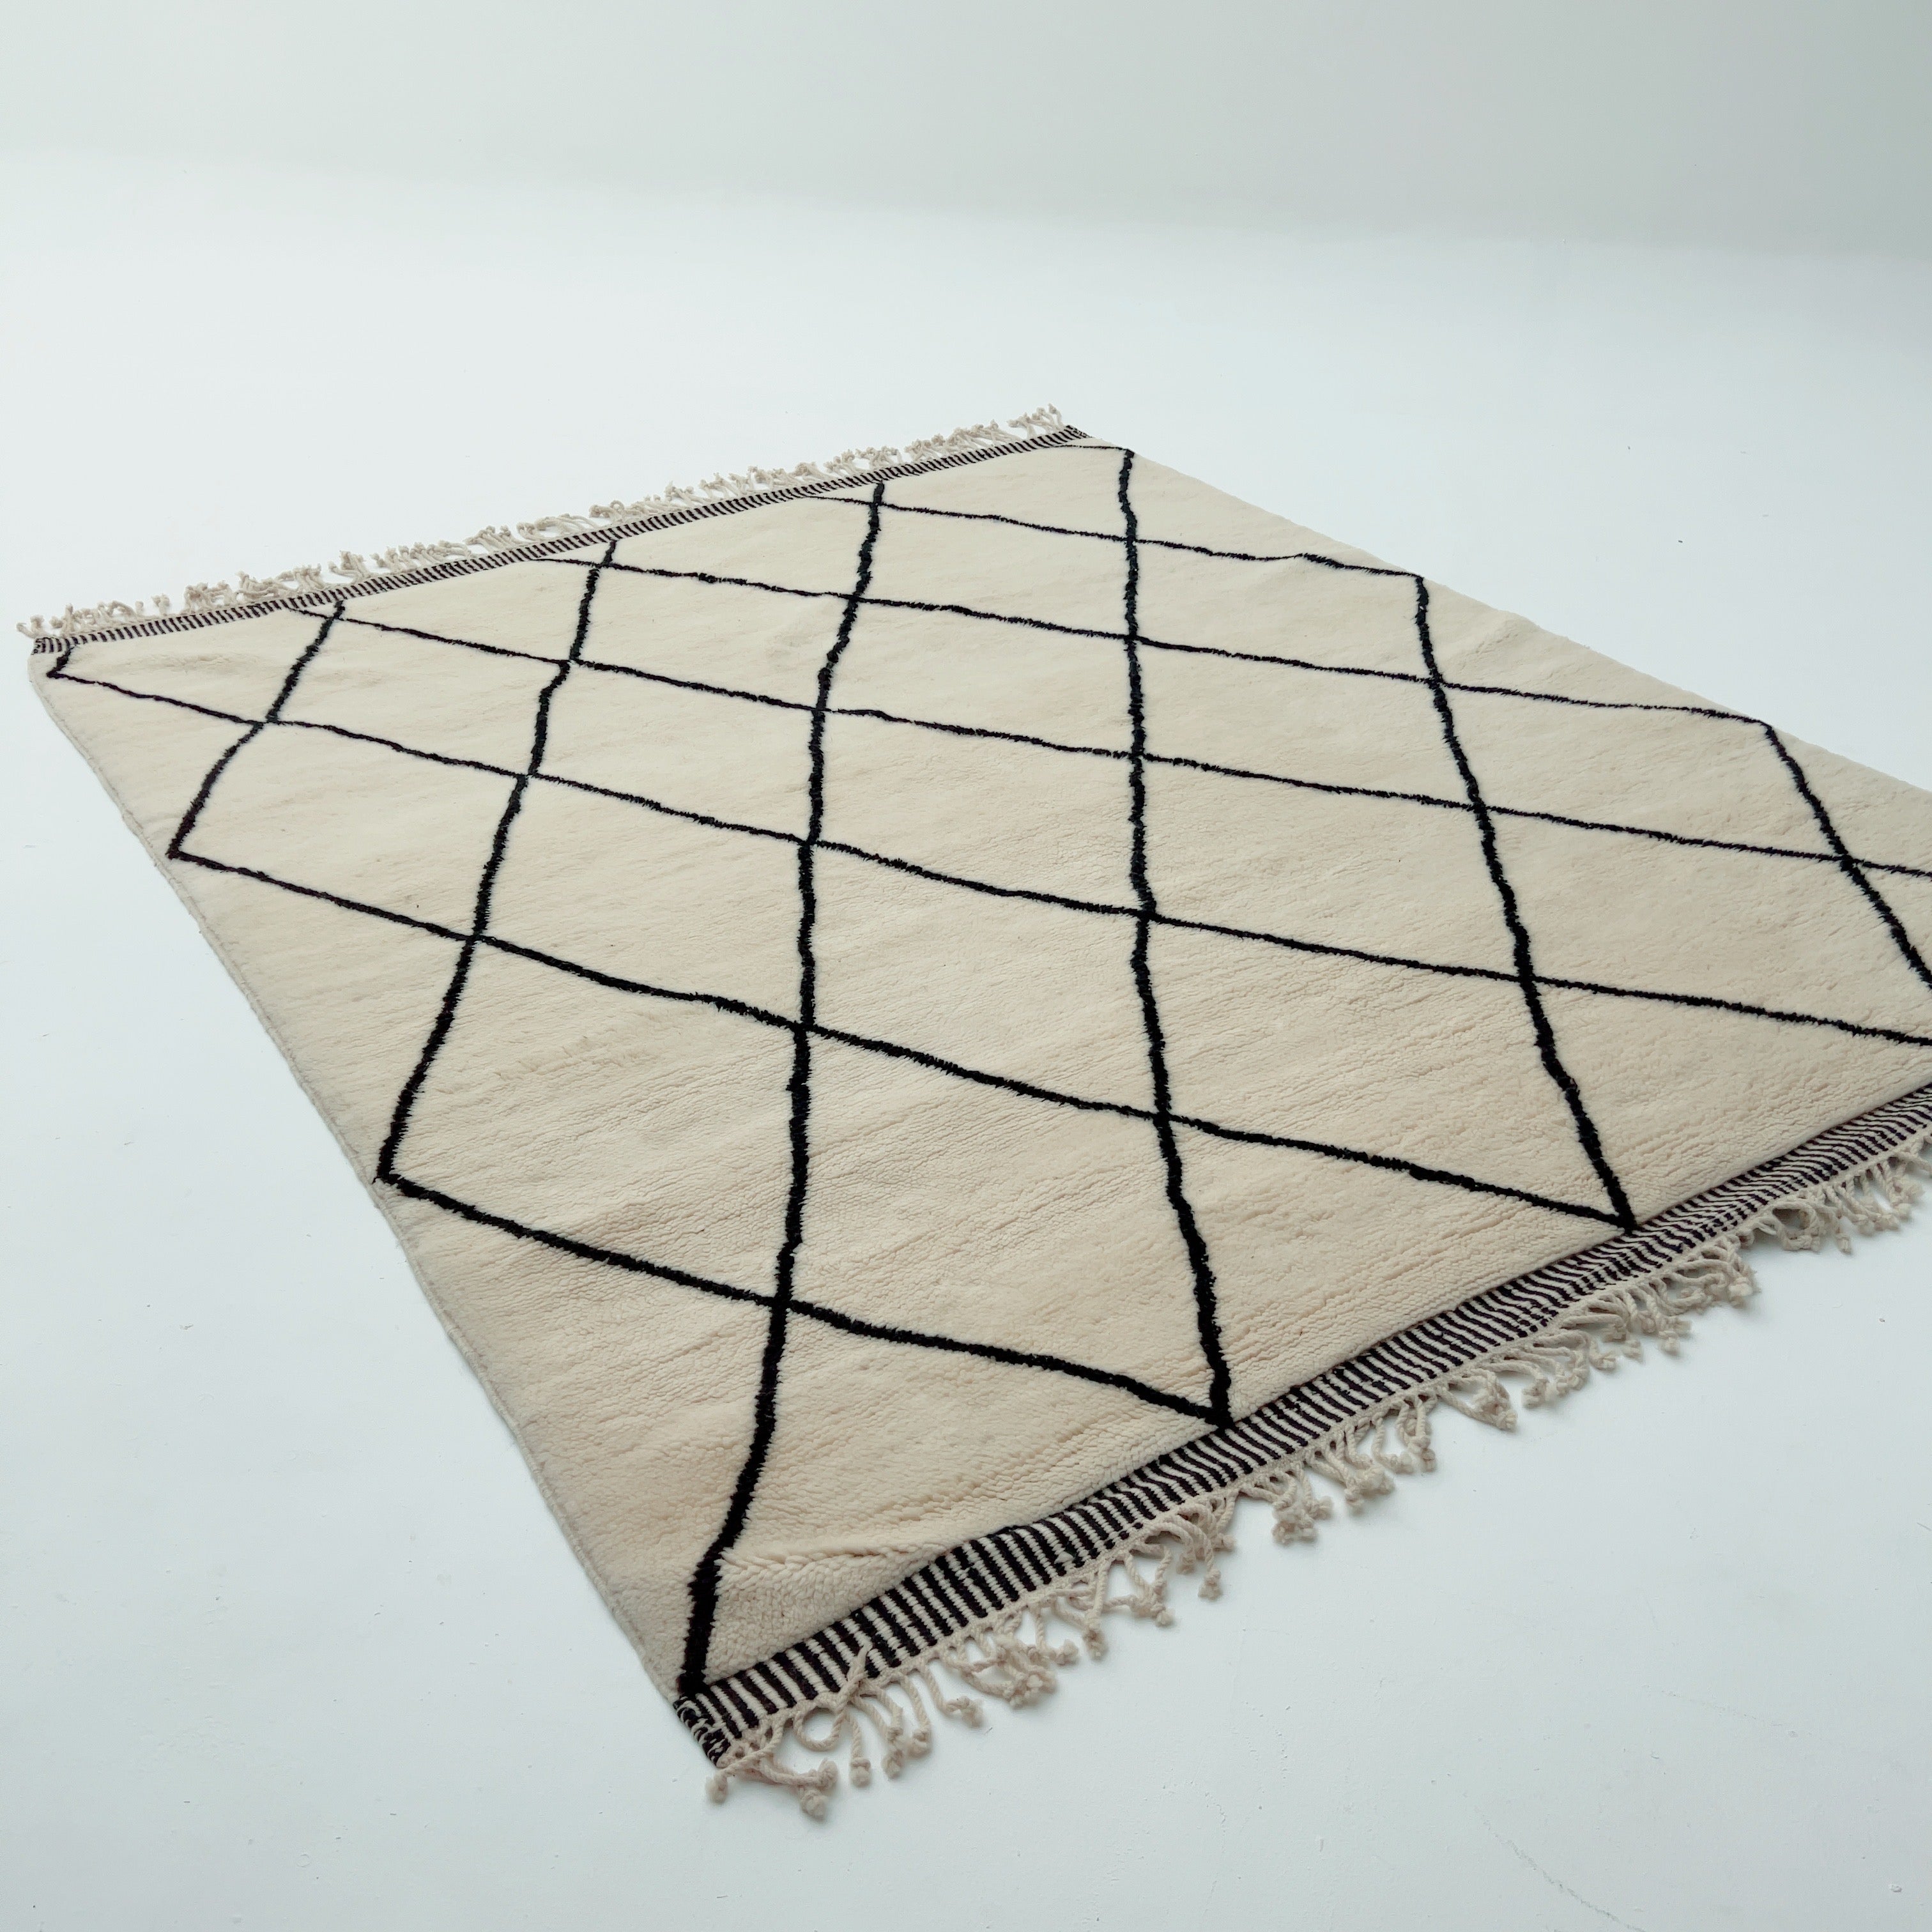 Beni Ourain Rug - Classic with bold lines - Beni Ourain Rug